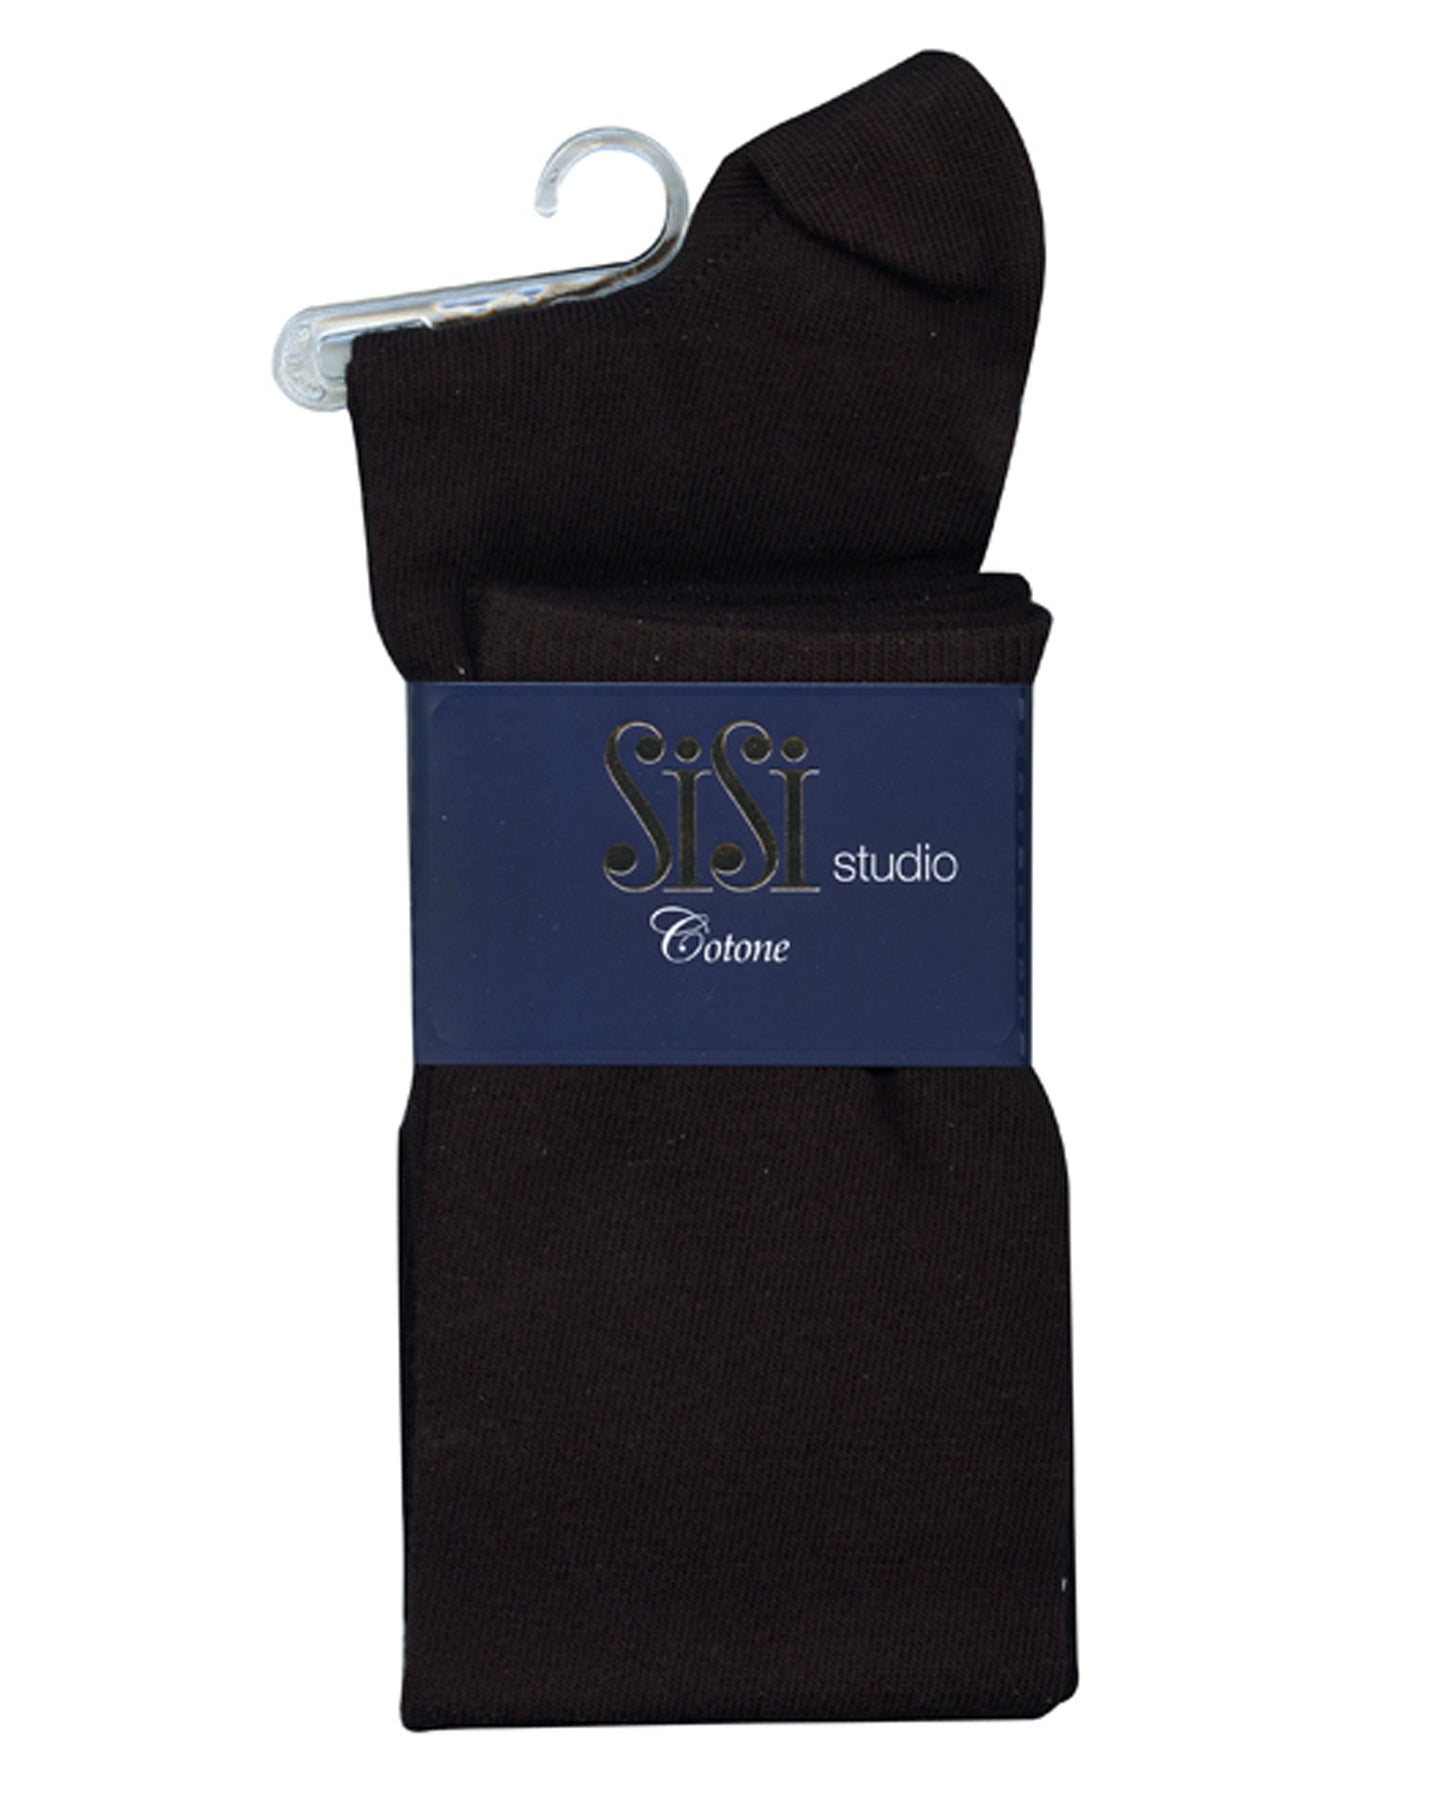 SiSi Soft Cotton Gambaletto pack -  Light weight cotton knee length socks with a deep elasticated cuff, shaped heel and flat toe seam. Available in black and navy.